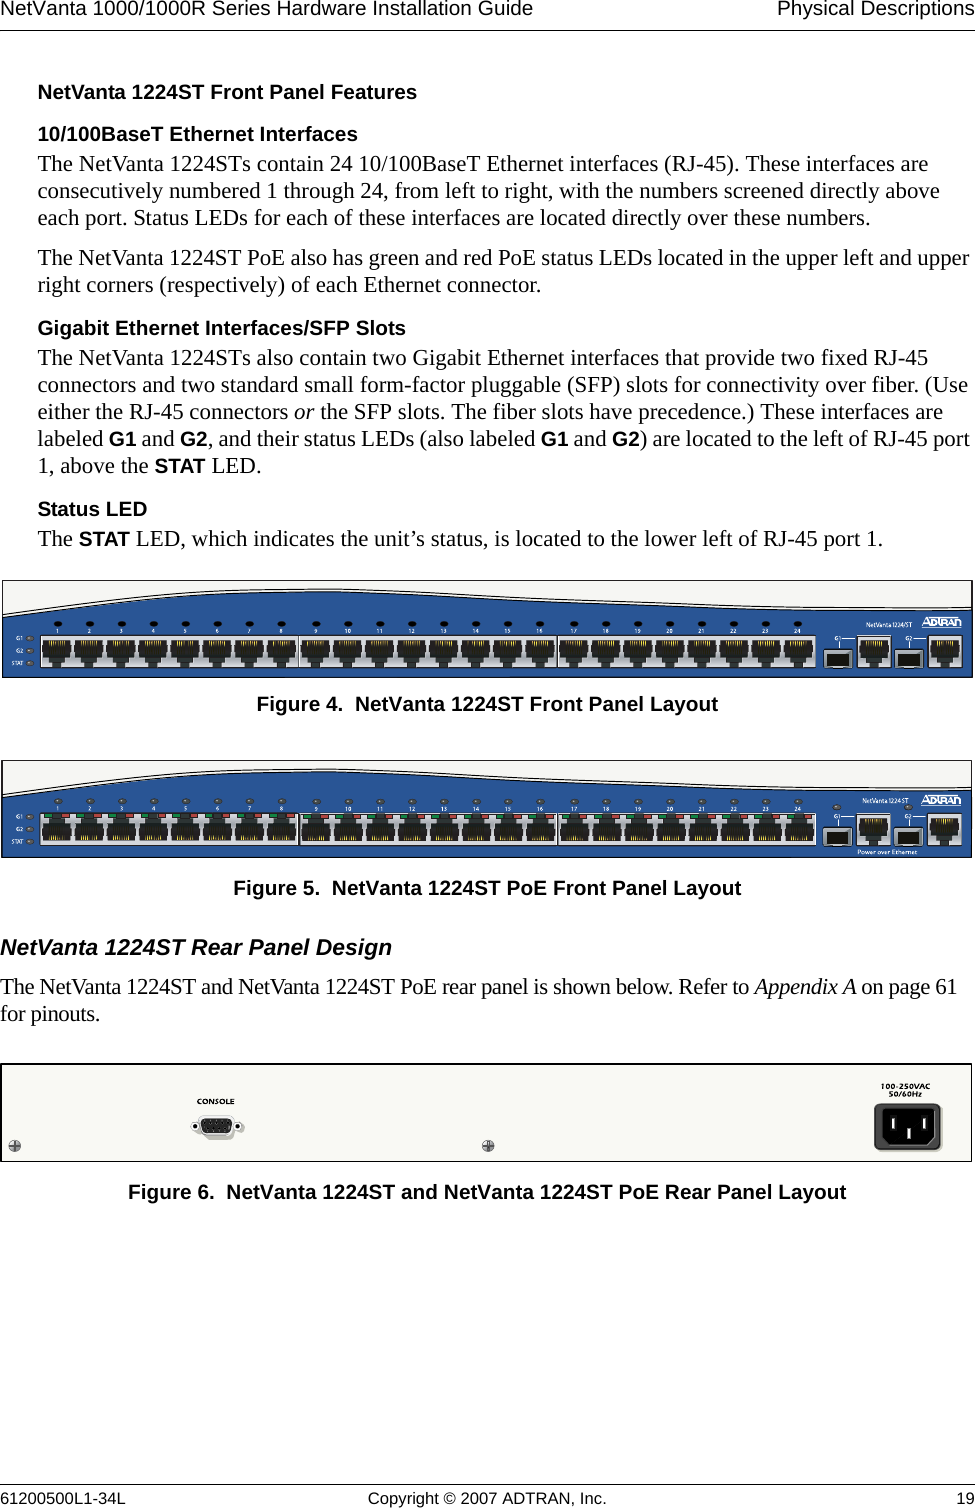 NetVanta 1000/1000R Series Hardware Installation Guide  Physical Descriptions61200500L1-34L Copyright © 2007 ADTRAN, Inc. 19NetVanta 1224ST Front Panel Features10/100BaseT Ethernet InterfacesThe NetVanta 1224STs contain 24 10/100BaseT Ethernet interfaces (RJ-45). These interfaces are consecutively numbered 1 through 24, from left to right, with the numbers screened directly above each port. Status LEDs for each of these interfaces are located directly over these numbers. The NetVanta 1224ST PoE also has green and red PoE status LEDs located in the upper left and upper right corners (respectively) of each Ethernet connector. Gigabit Ethernet Interfaces/SFP SlotsThe NetVanta 1224STs also contain two Gigabit Ethernet interfaces that provide two fixed RJ-45 connectors and two standard small form-factor pluggable (SFP) slots for connectivity over fiber. (Use either the RJ-45 connectors or the SFP slots. The fiber slots have precedence.) These interfaces are labeled G1 and G2, and their status LEDs (also labeled G1 and G2) are located to the left of RJ-45 port 1, above the STAT LED. Status LEDThe STAT LED, which indicates the unit’s status, is located to the lower left of RJ-45 port 1. Figure 4.  NetVanta 1224ST Front Panel LayoutFigure 5.  NetVanta 1224ST PoE Front Panel LayoutNetVanta 1224ST Rear Panel DesignThe NetVanta 1224ST and NetVanta 1224ST PoE rear panel is shown below. Refer to Appendix A on page 61 for pinouts.Figure 6.  NetVanta 1224ST and NetVanta 1224ST PoE Rear Panel Layout